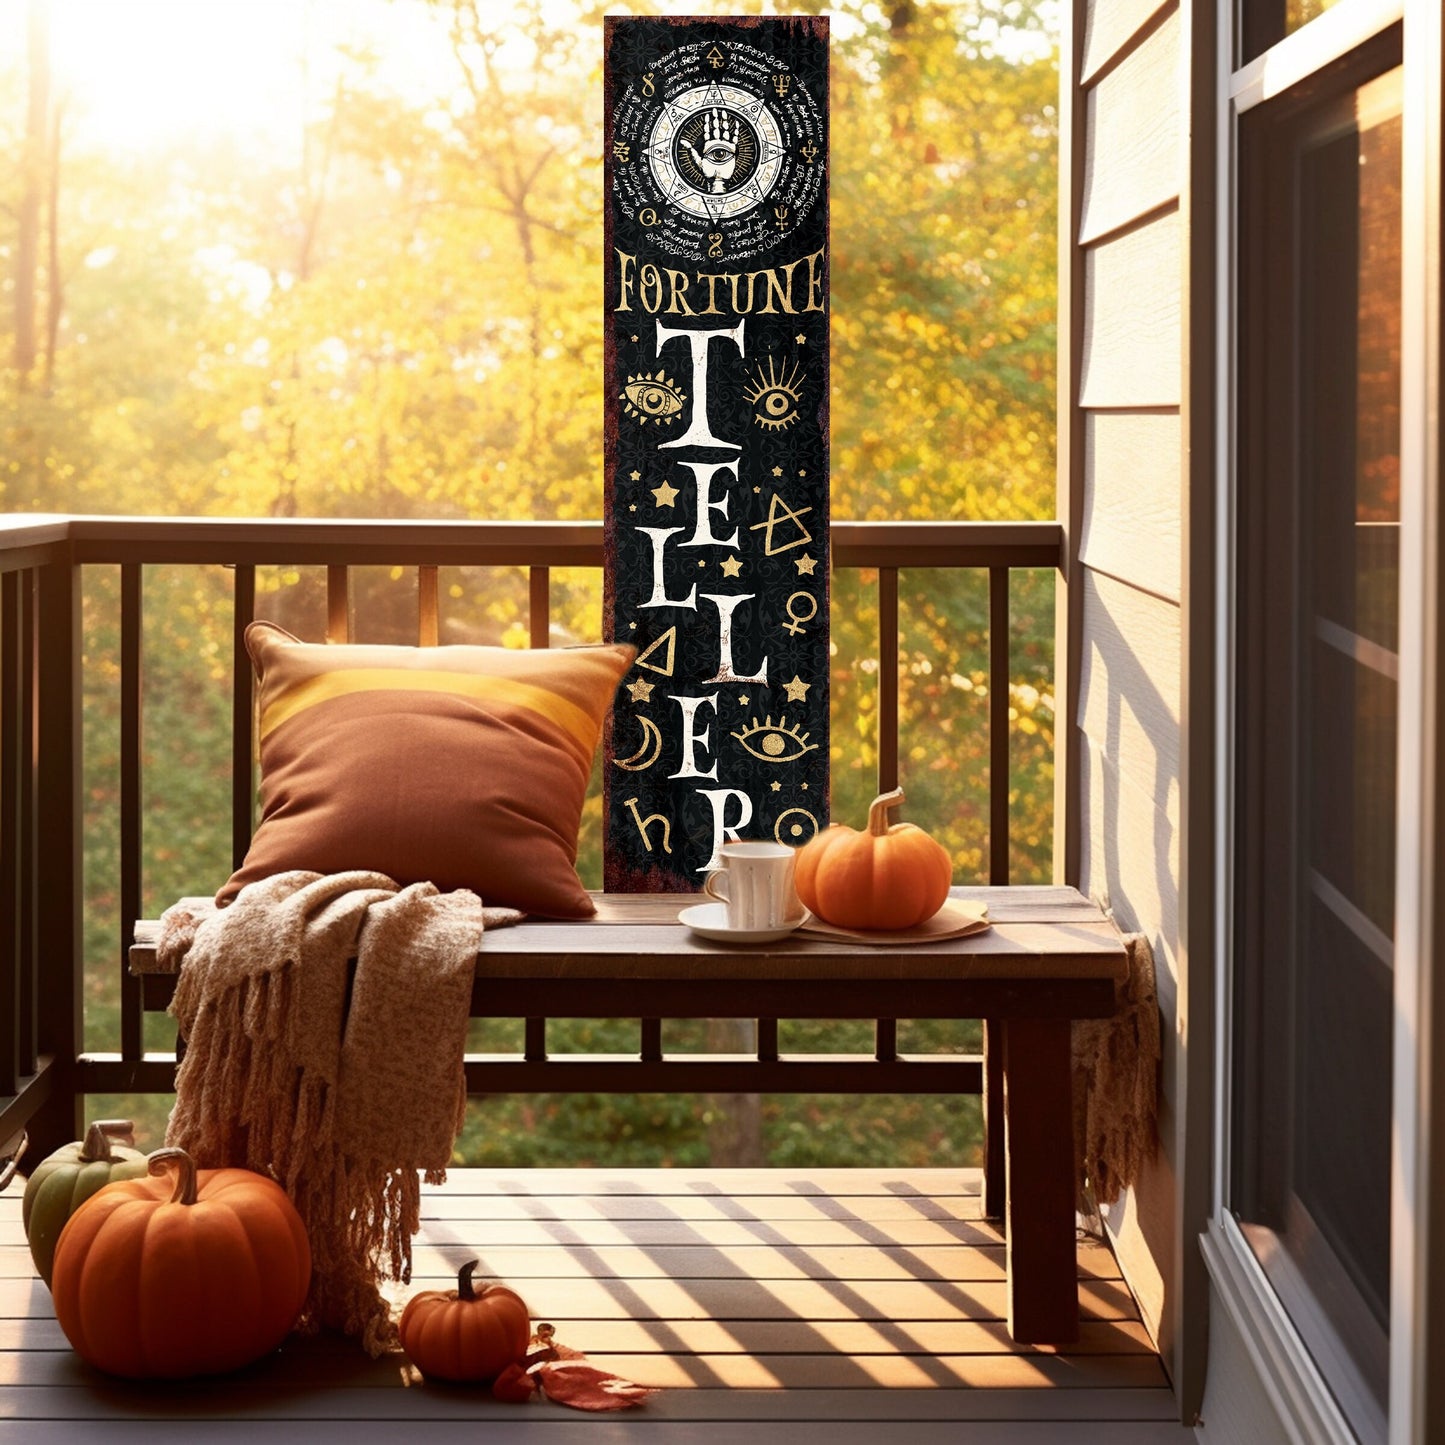 36in Fortune Teller Halloween Porch Sign - Front Porch Halloween Welcome Sign with Vintage Decoration, Rustic Farmhouse Entryway Porch Decor